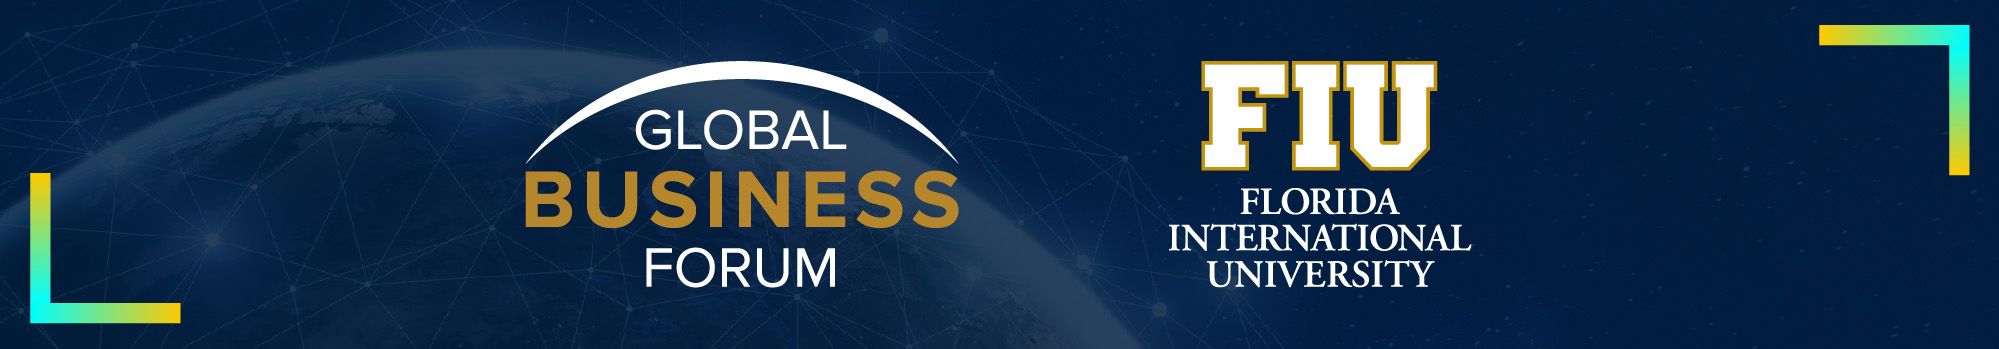 Global Business Forum Episodes